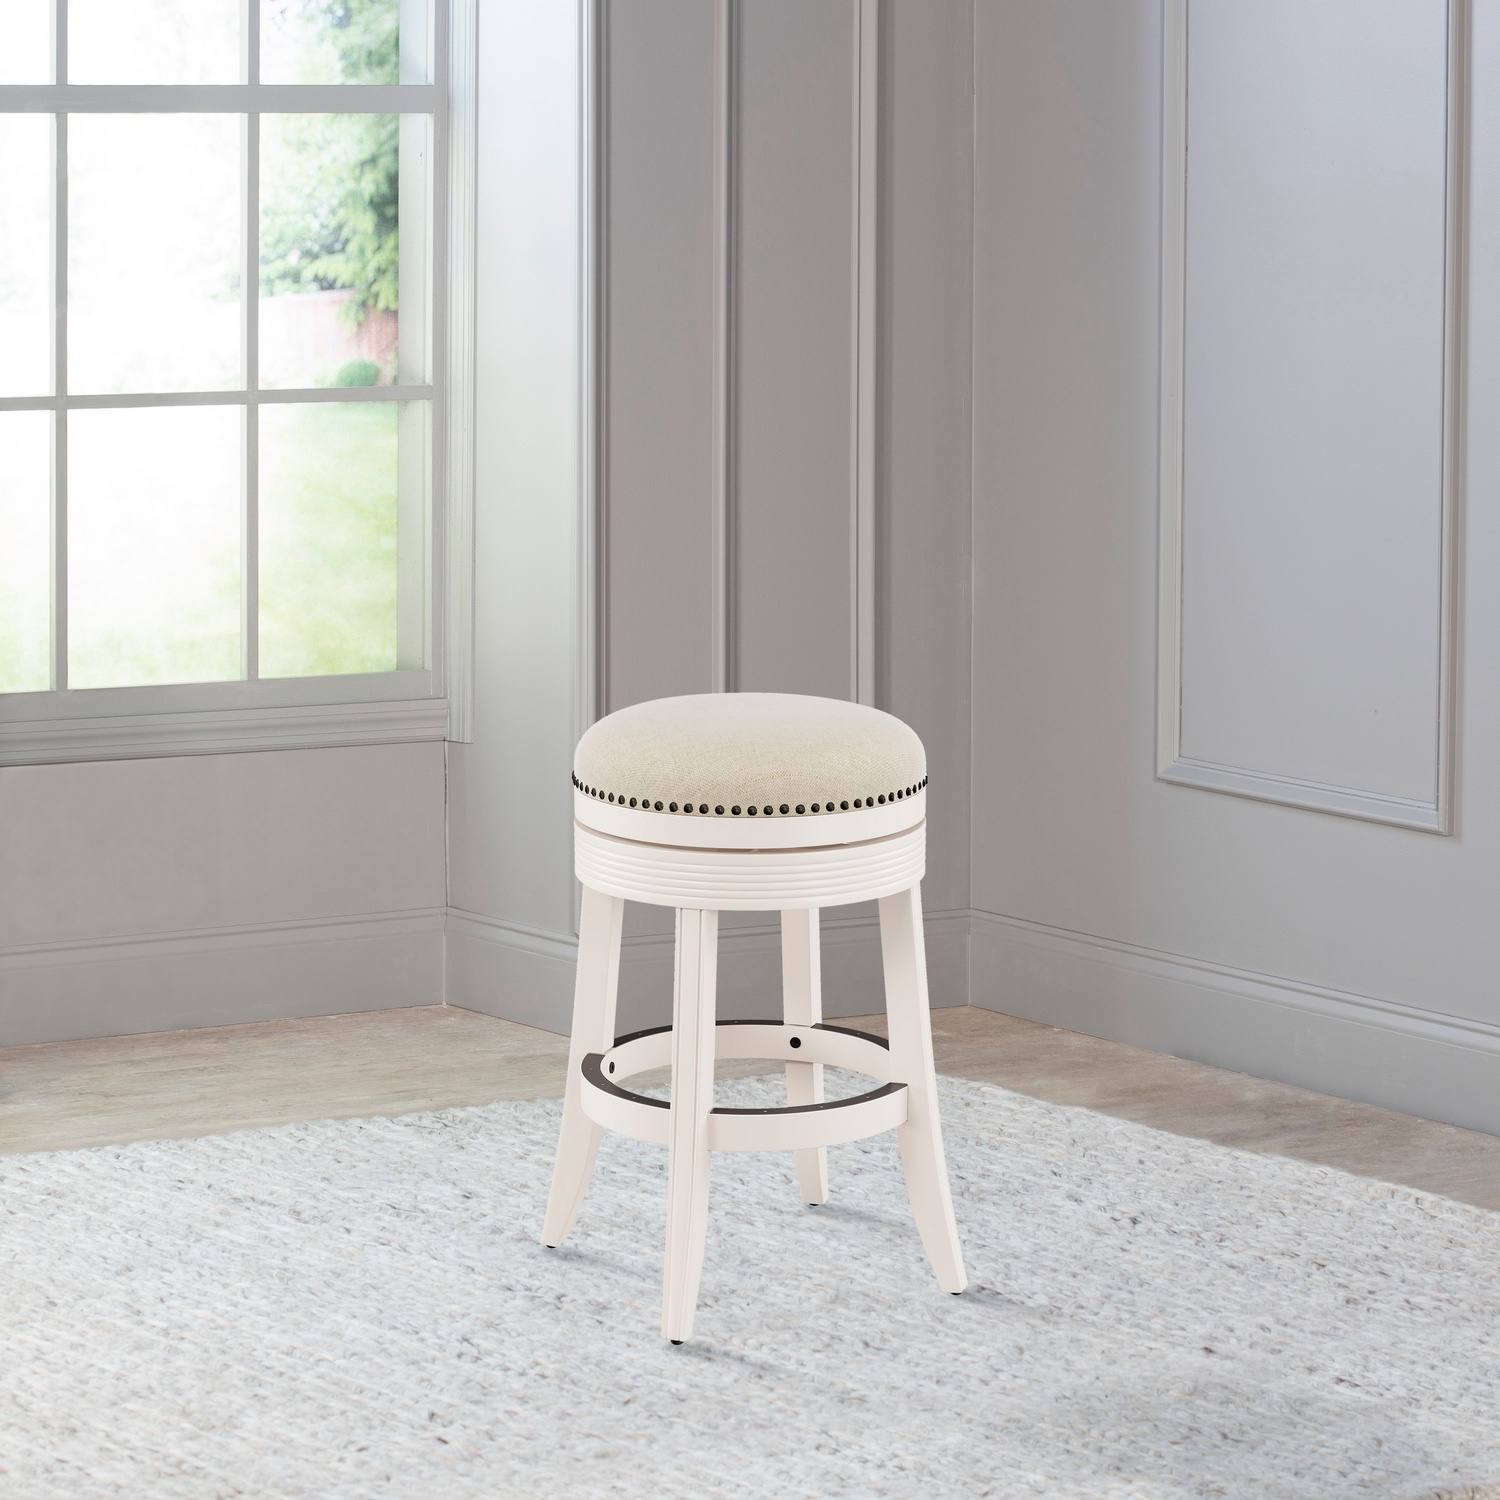 Hillsdale Tillman Wood Backless Counter Height Swivel Stool - White